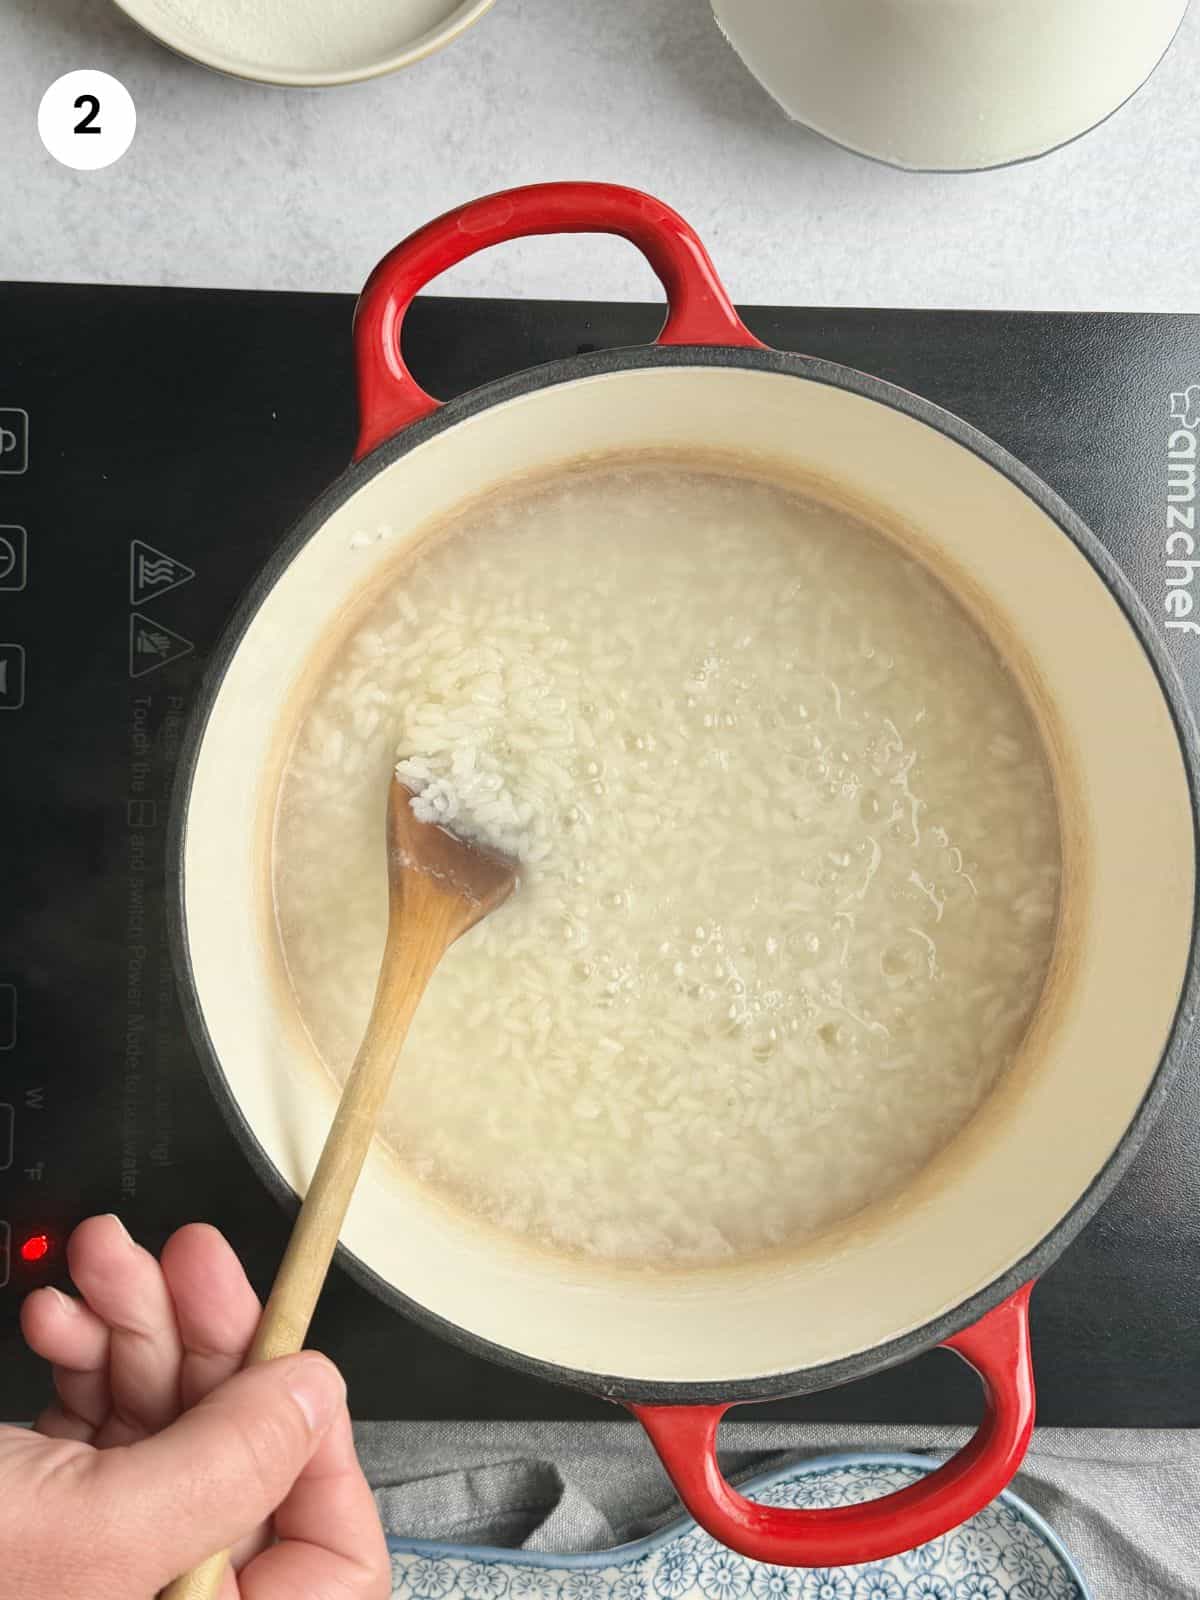 Cooked rice that has absorbed the water.